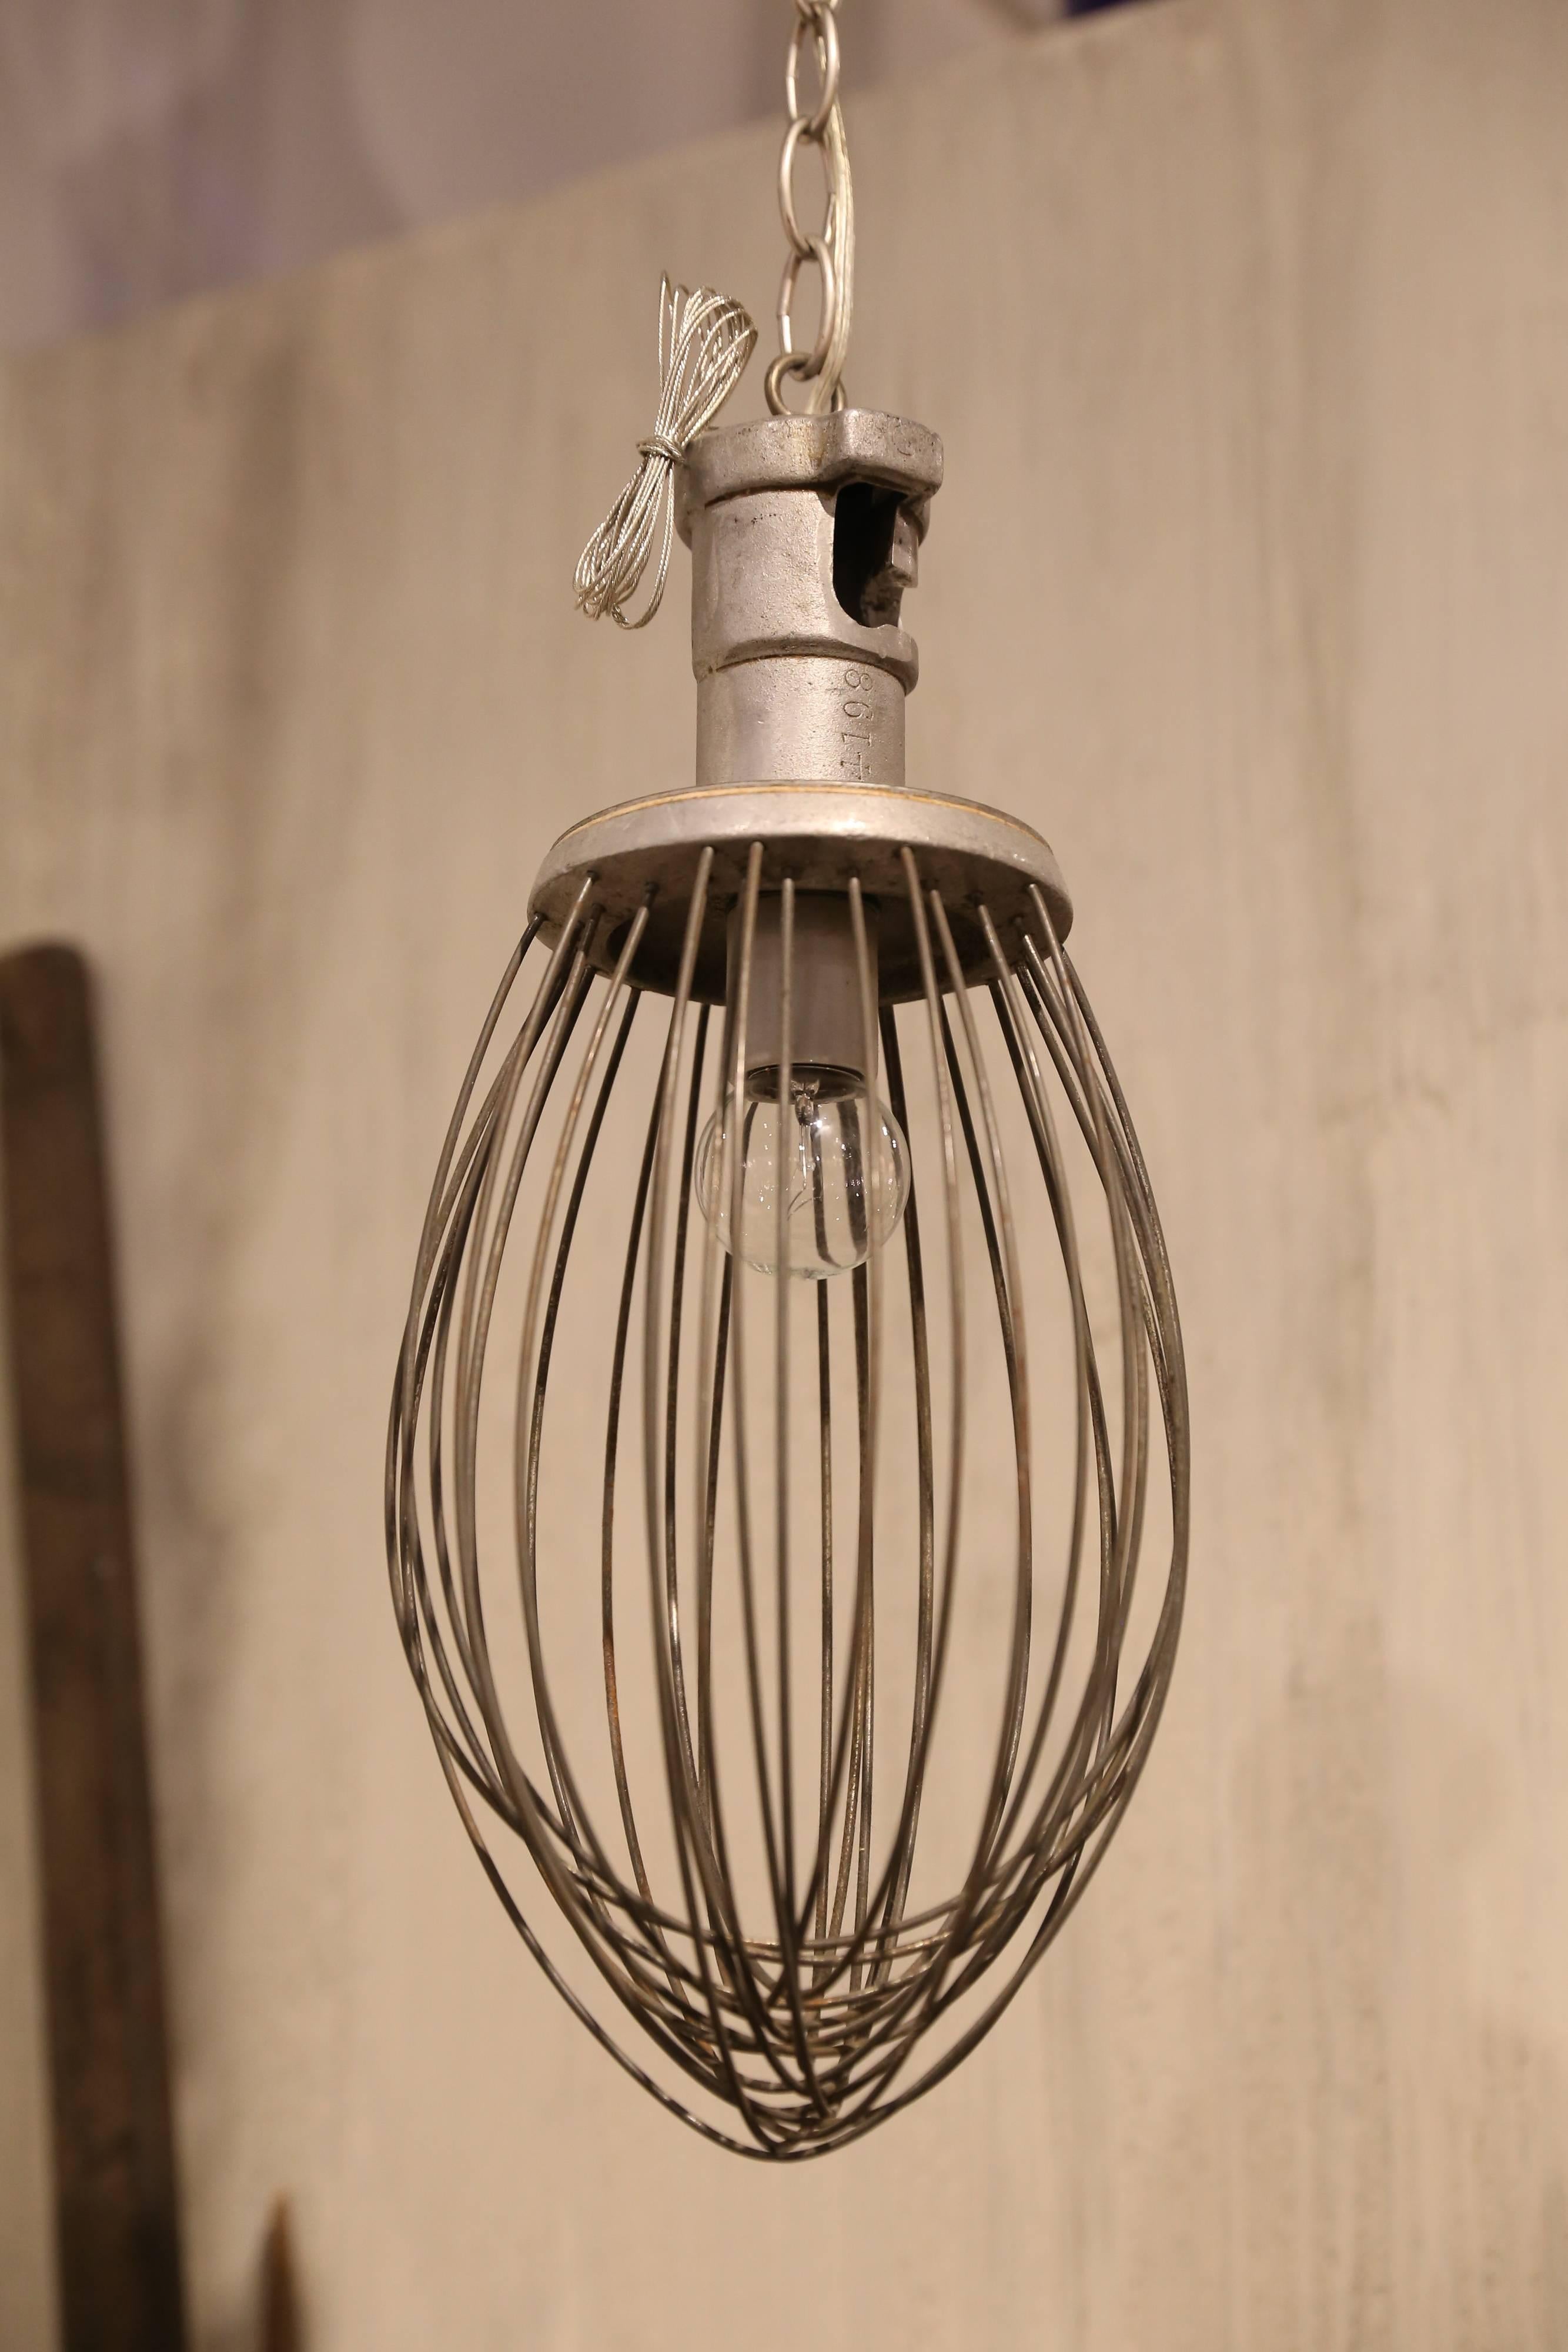 A commercial bakery whisk found in France takes a new turn as a pendant light fixture. With approximately 40 inches of chain and a 5 inch tin canopy, this one is just plain fun.